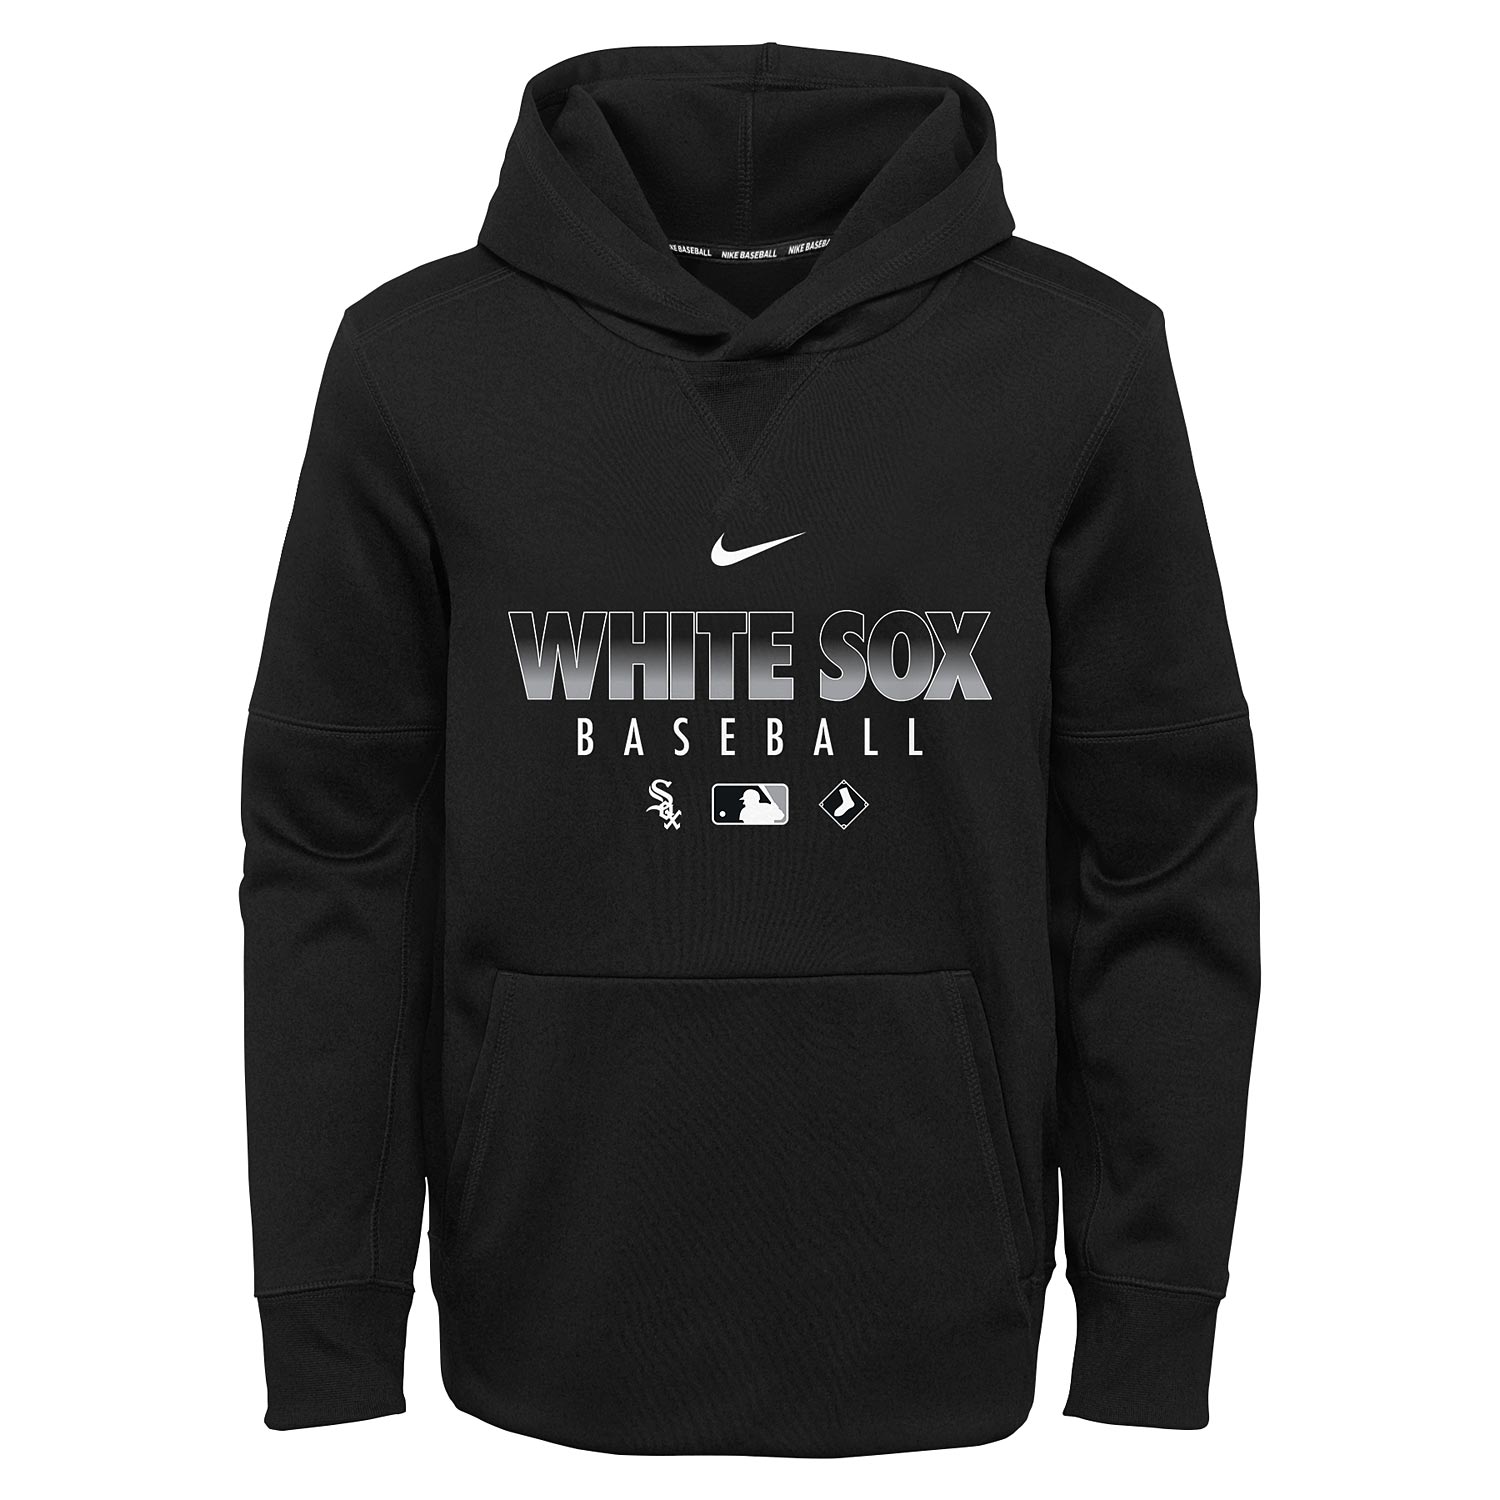 Nike Dri-FIT Early Work (MLB Chicago White Sox) Men's Pullover Hoodie.